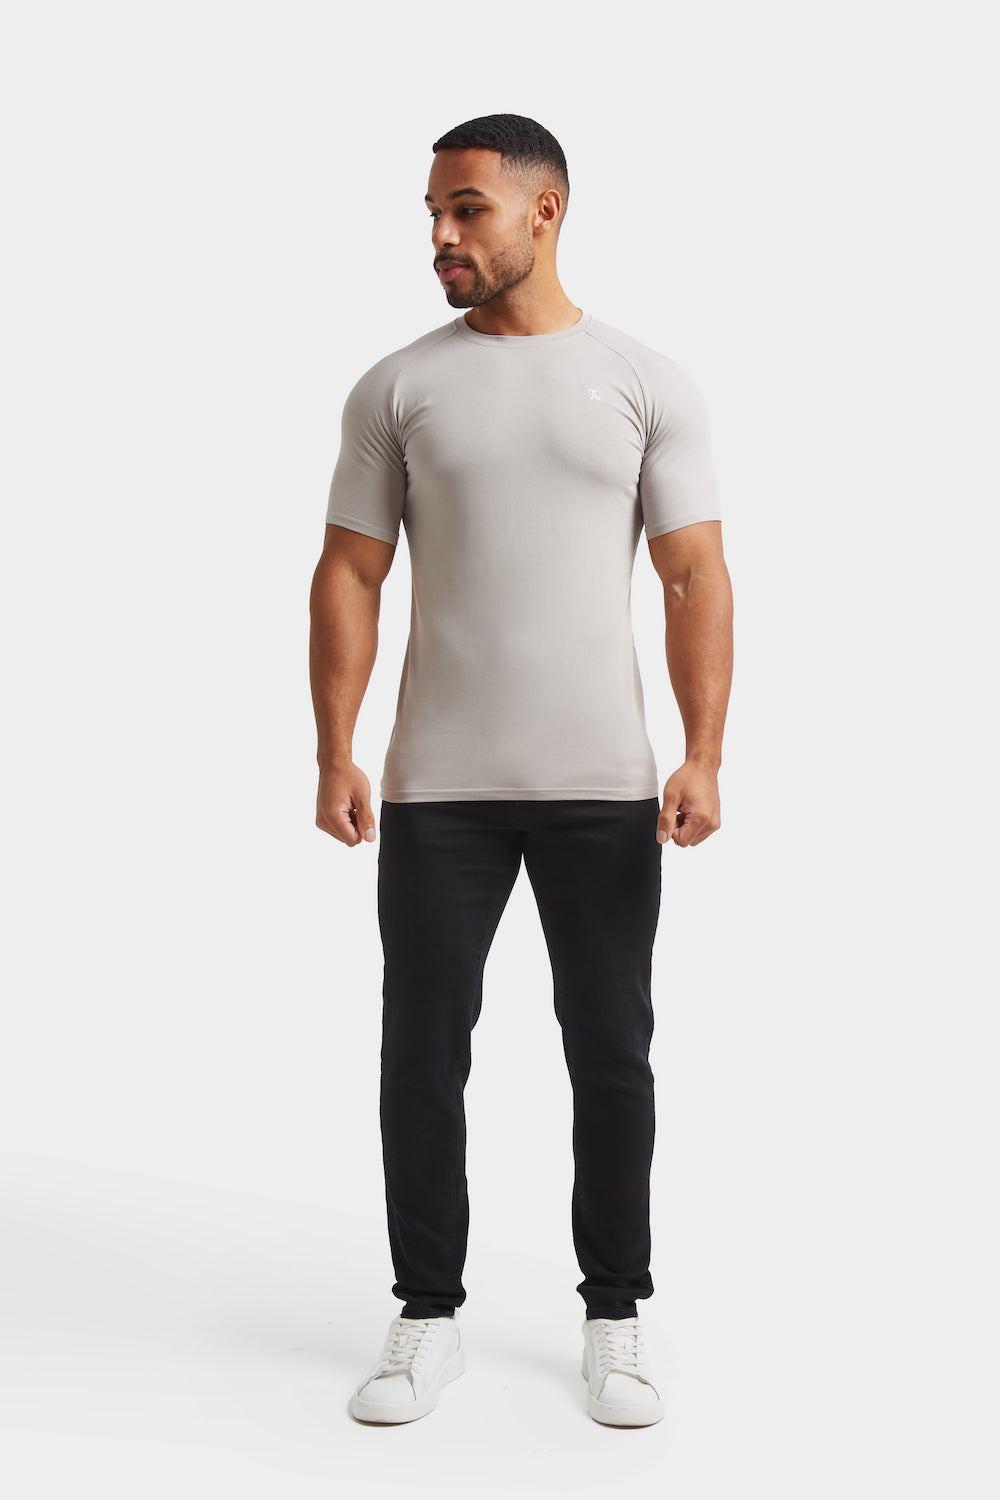 Premium Muscle Fit T-Shirt in Concrete Grey - TAILORED ATHLETE - ROW